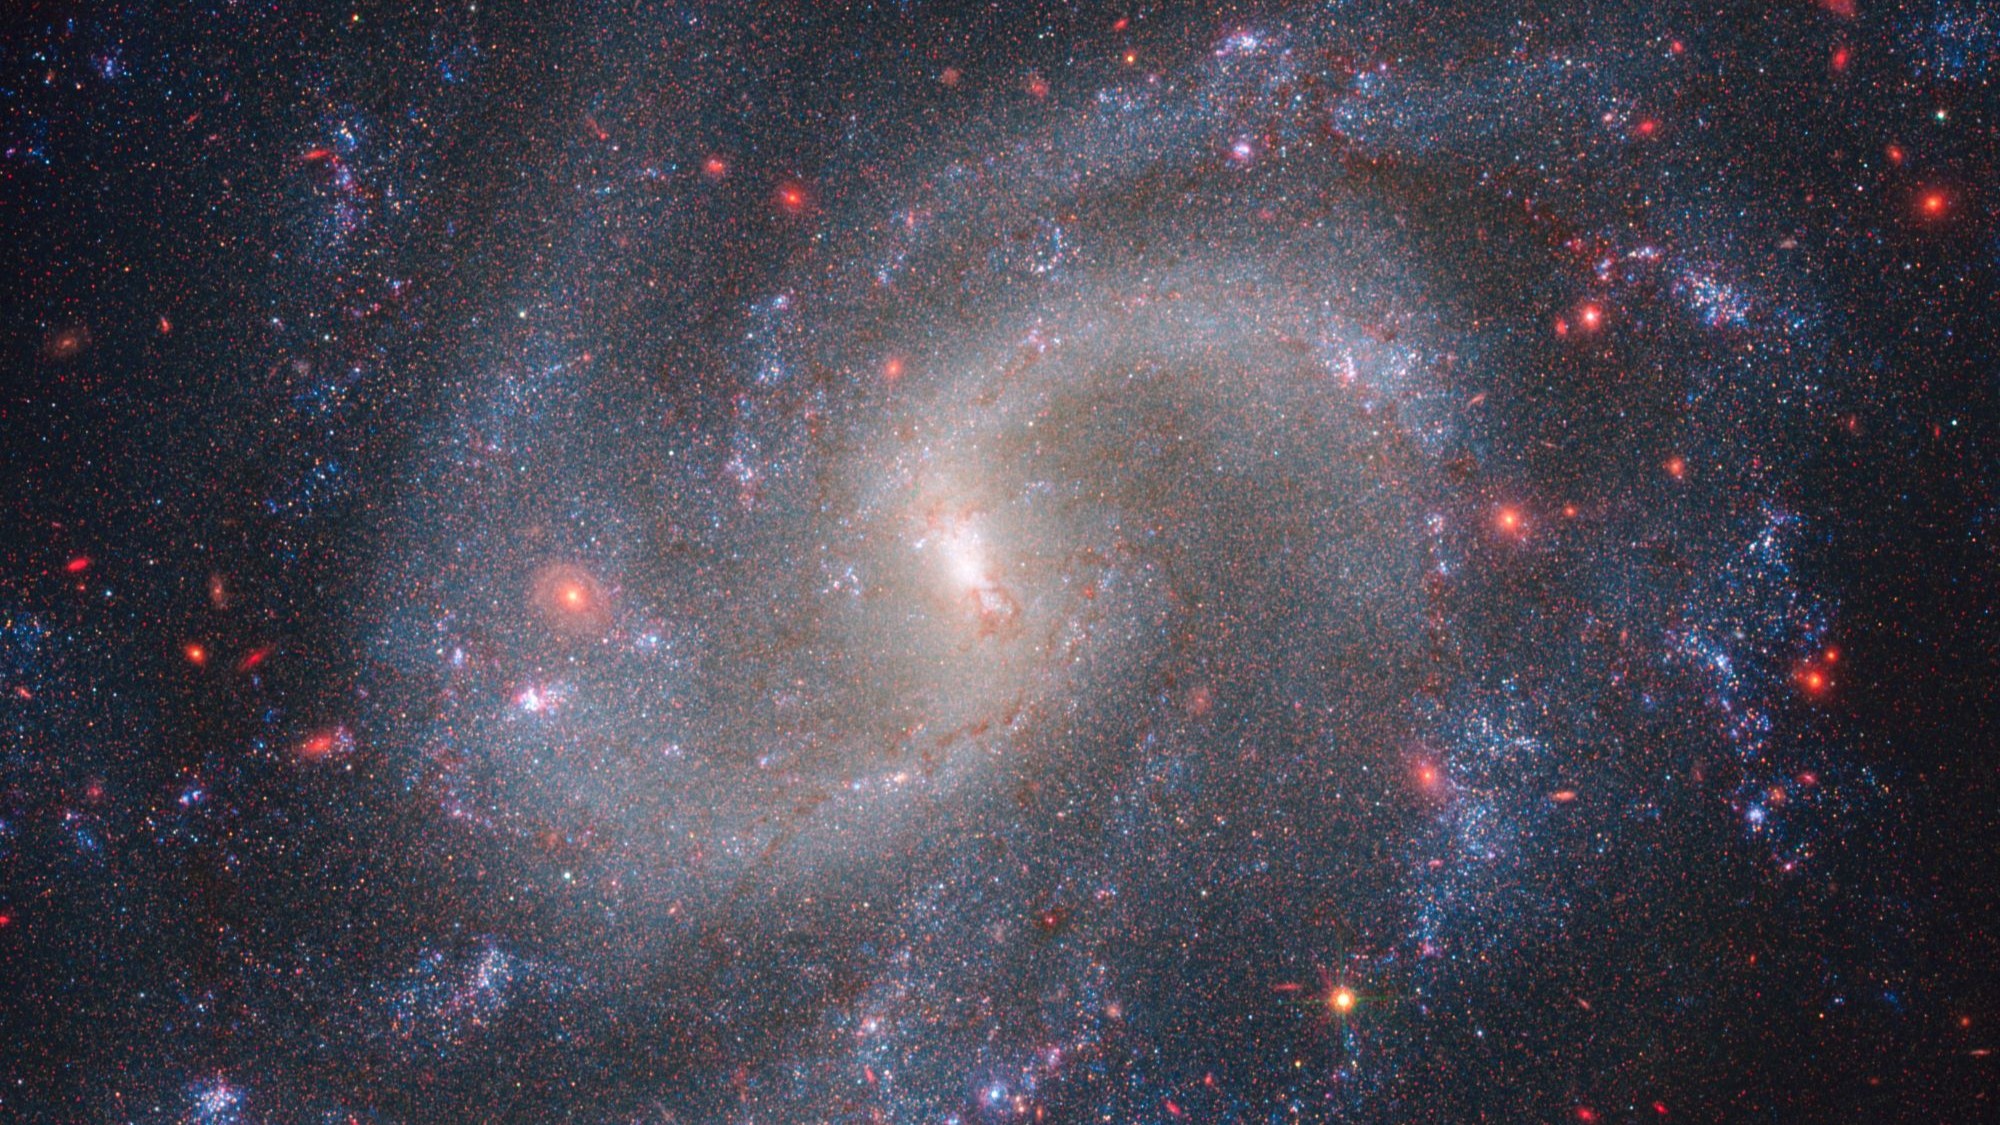 A purplish spiral galaxy with red and yellow space objects.